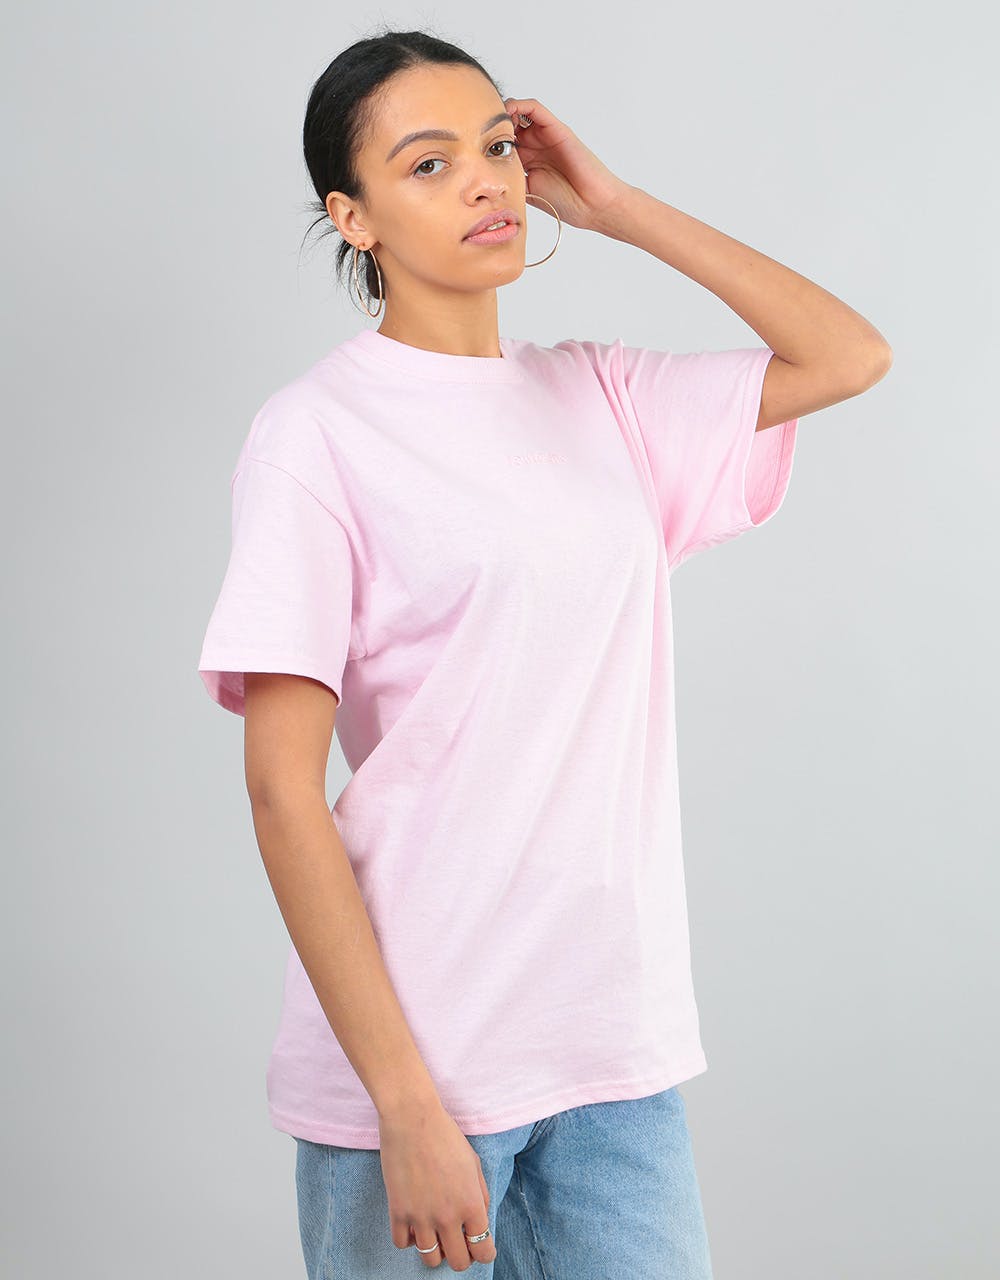 Route One Embroidered Logo Oversized T-Shirt - Light Pink